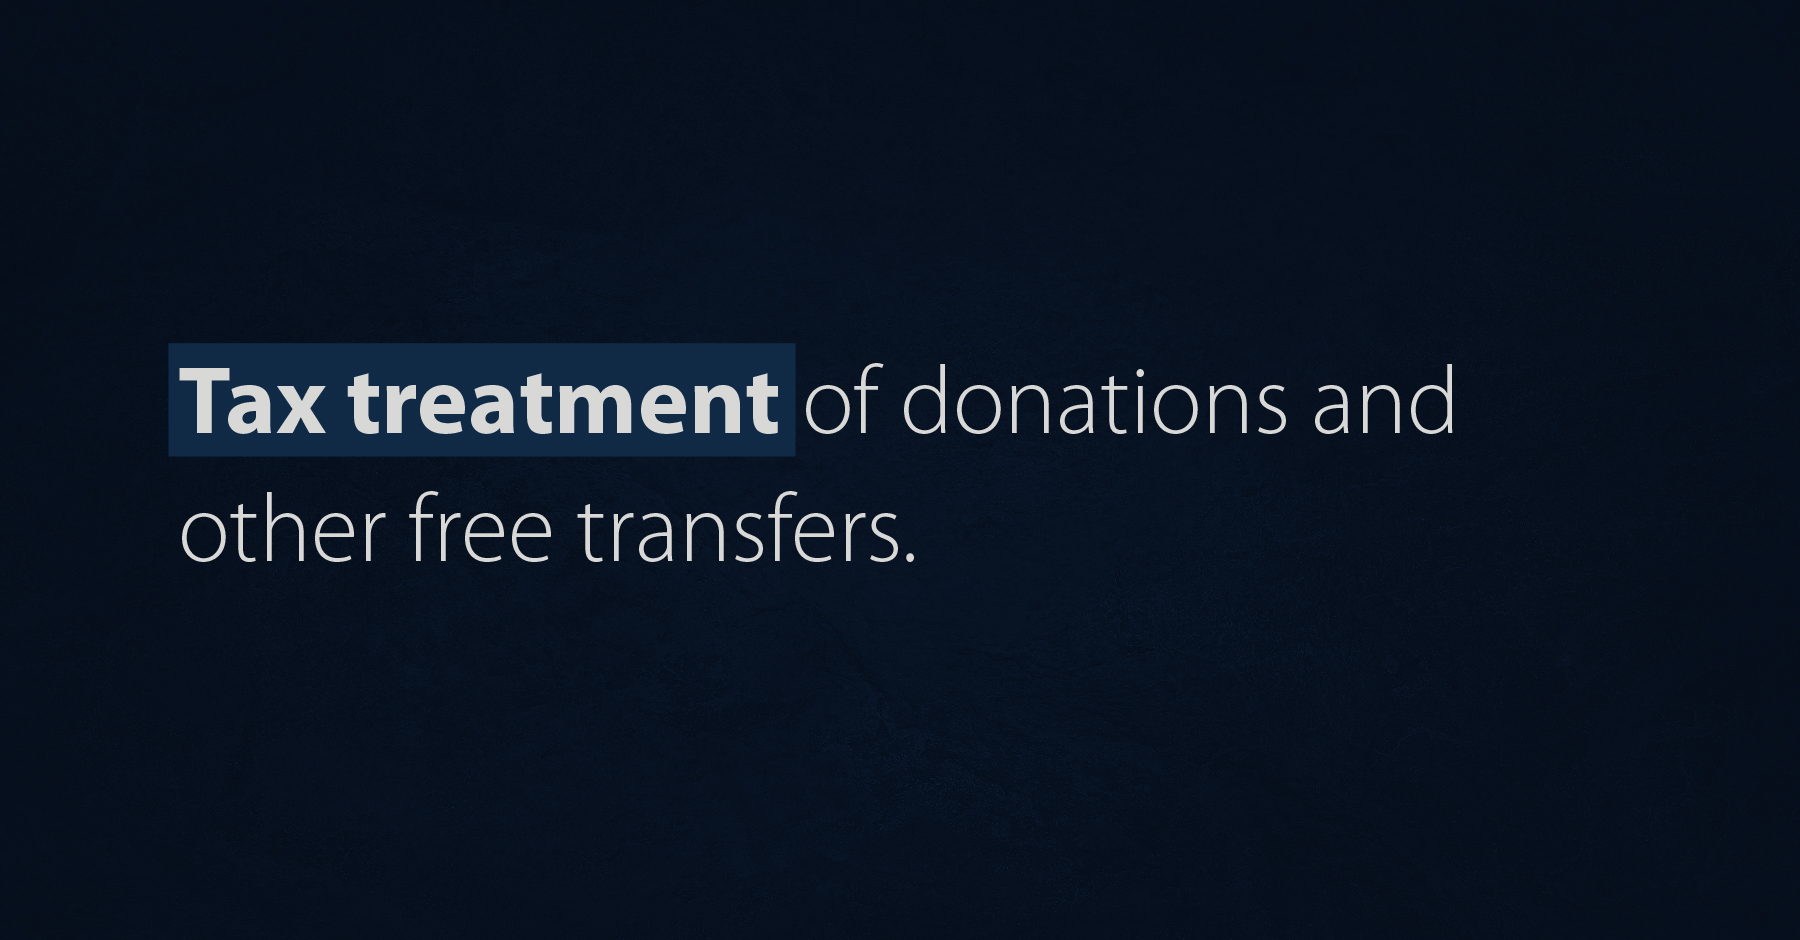 Tax treatment of donations and other free transfers